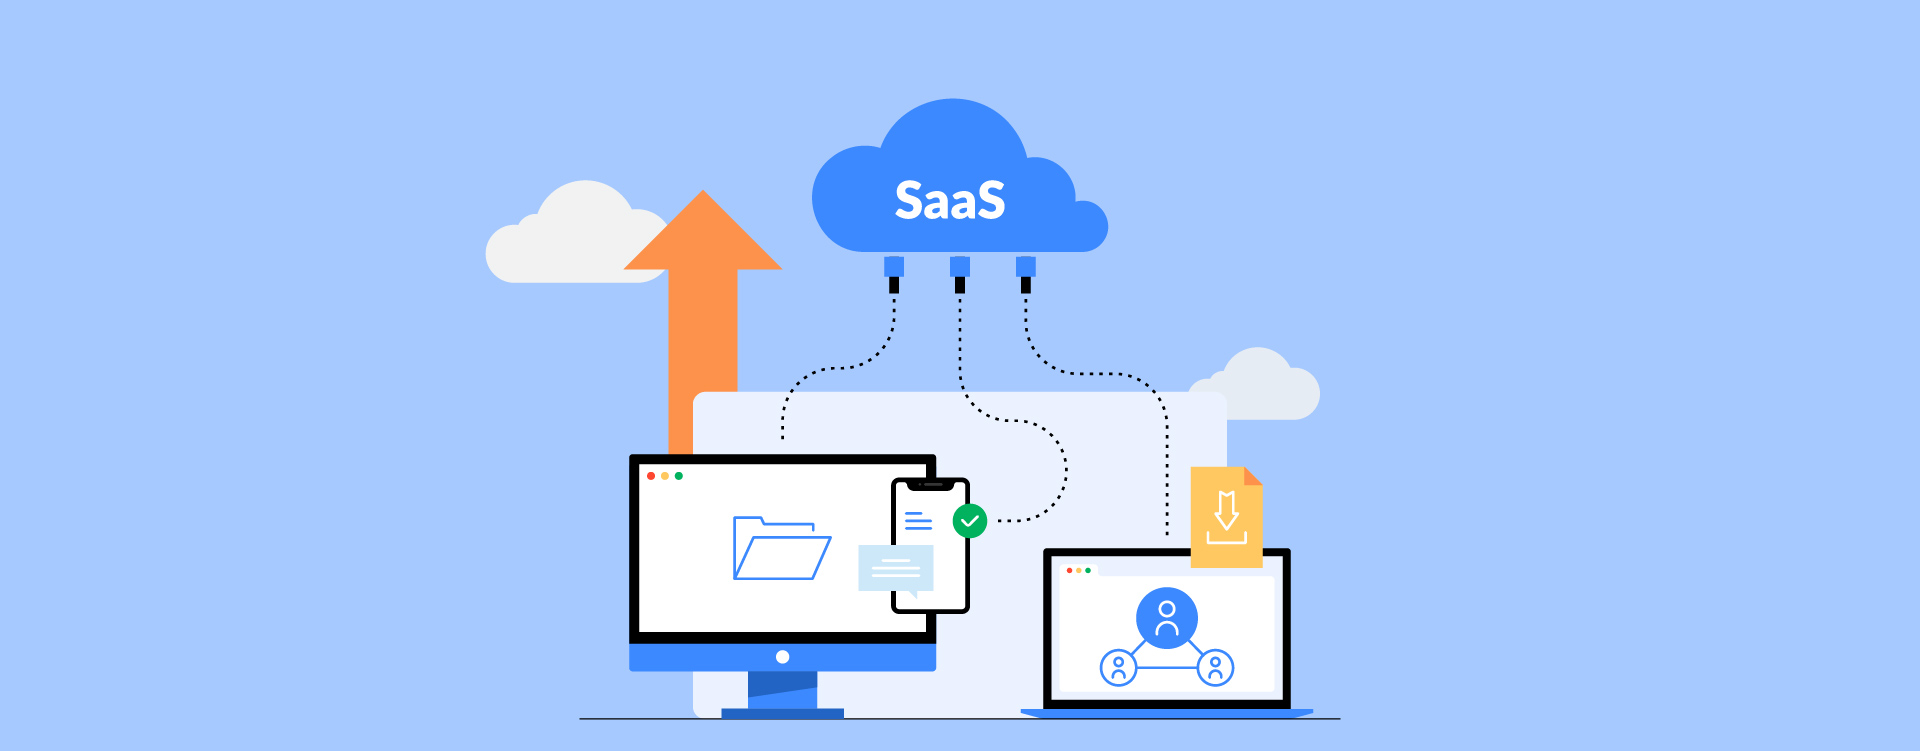 India's SaaS Industry Could Reach $1 Trillion in Value